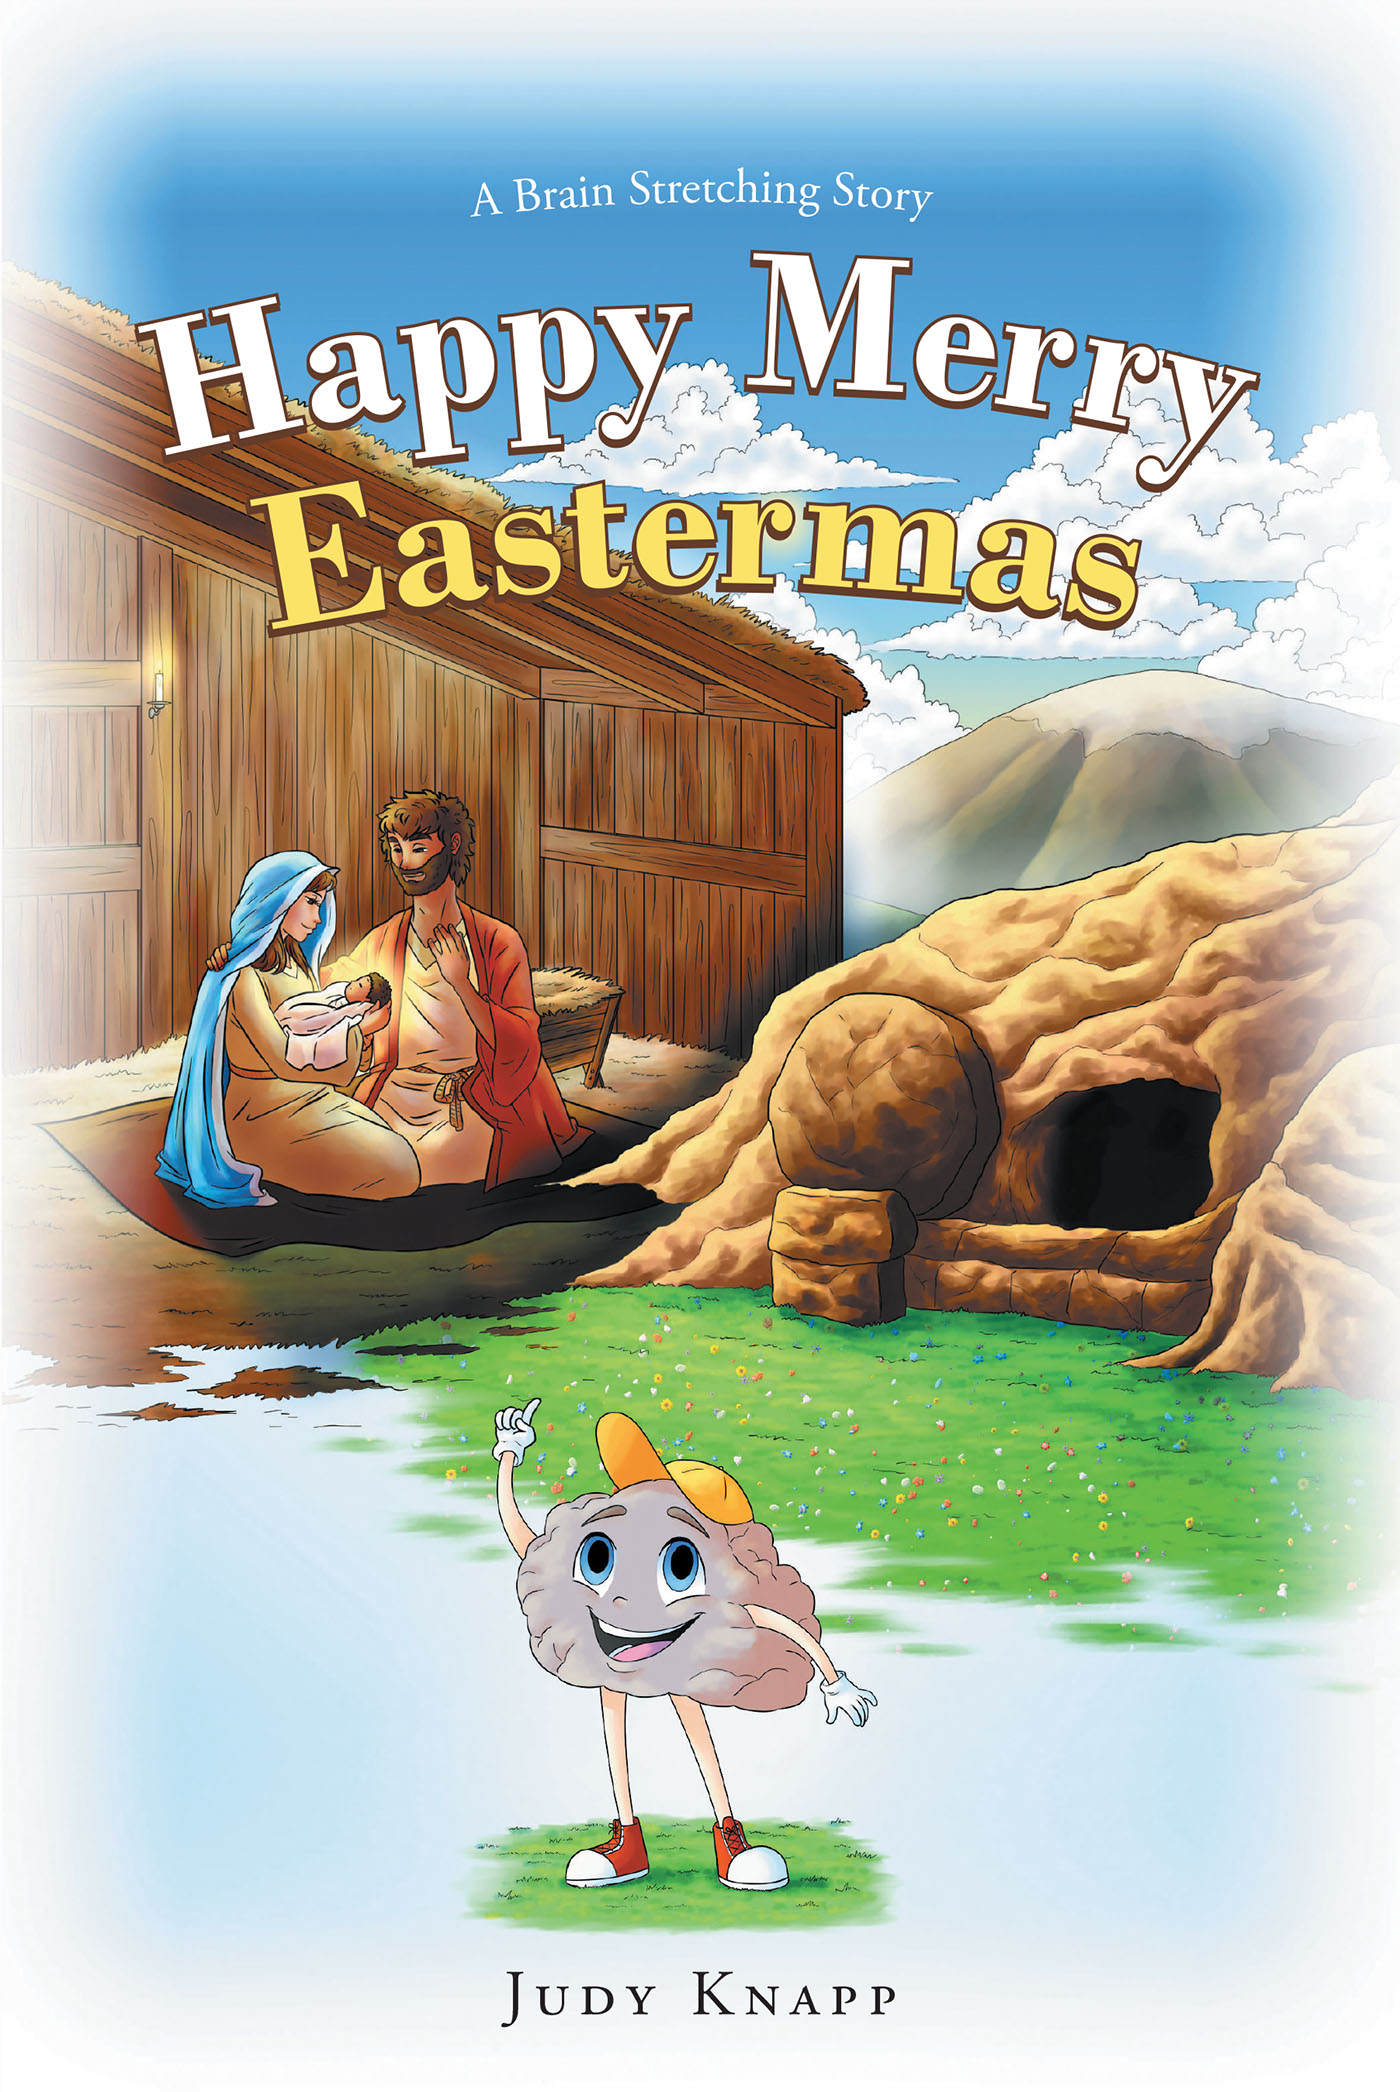 Judy Knapp’s Newly Released "Happy Merry Eastermas: A Brain Stretching Story" is an Entertaining Approach to Understanding Key Holidays in the Christian Faith